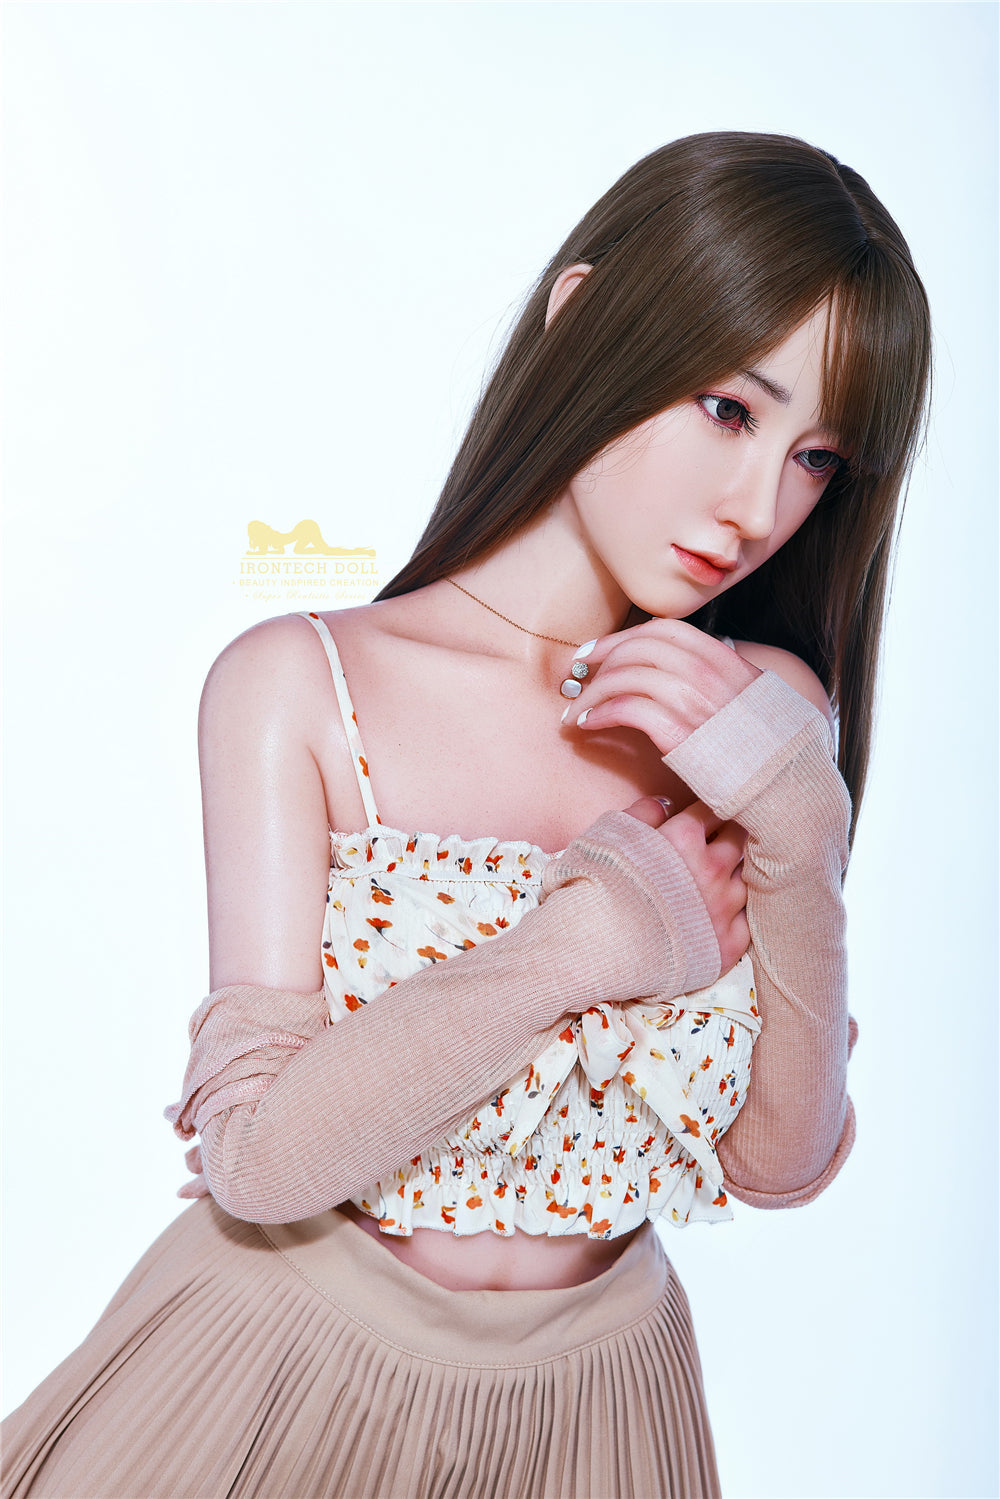 Irontech Doll 153 cm Silicone - Amalia | Buy Sex Dolls at DOLLS ACTUALLY